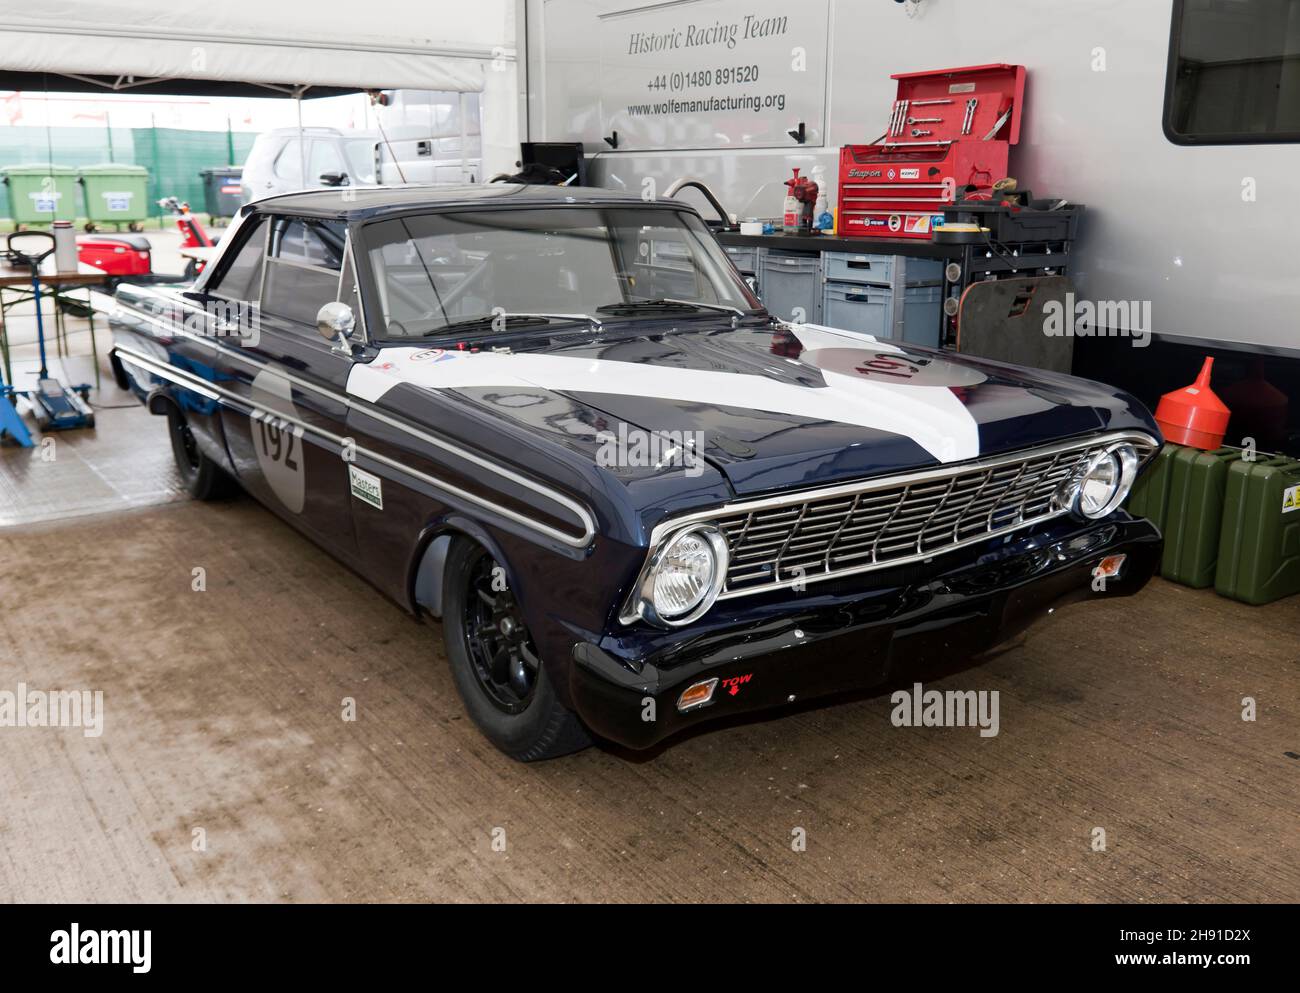 Three-quarters front view of a Dark Blue, 1964 Ford Falcon, in the pit garage of the Historic Racing Team, at the 2021 Silverstone Classic Stock Photo